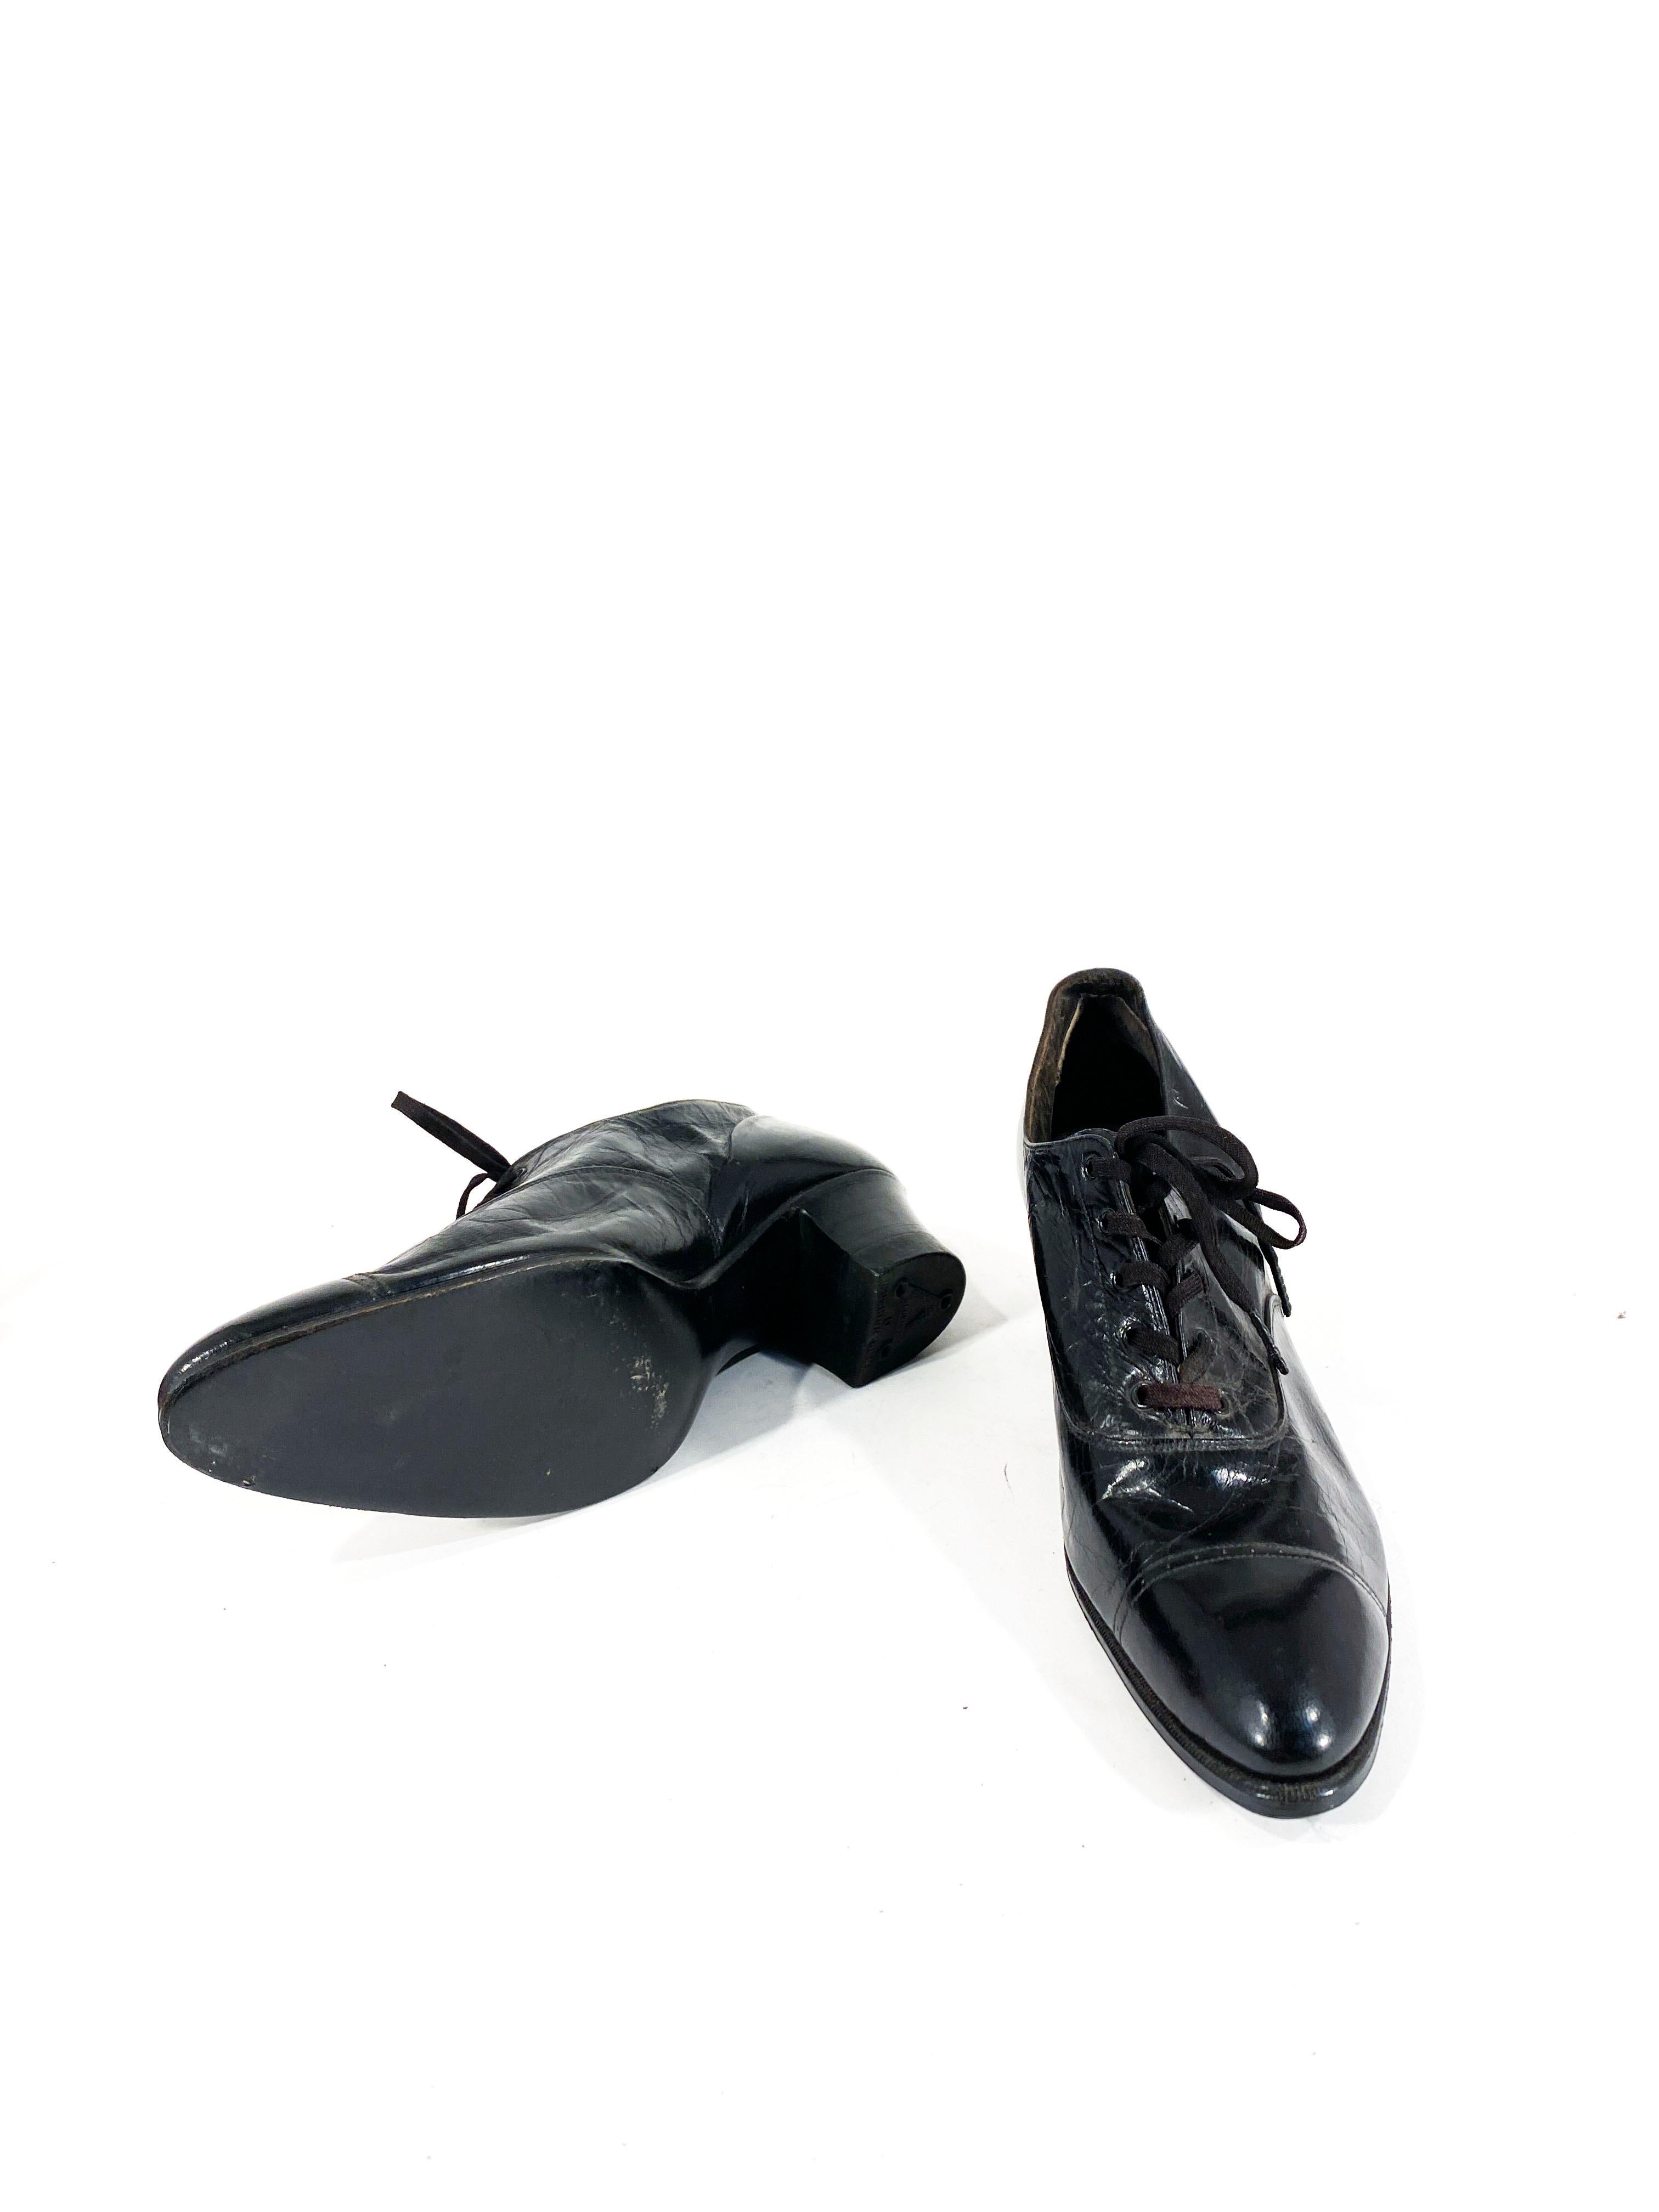 Edwardian Black Leather Women's Work Shoes In Good Condition For Sale In San Francisco, CA